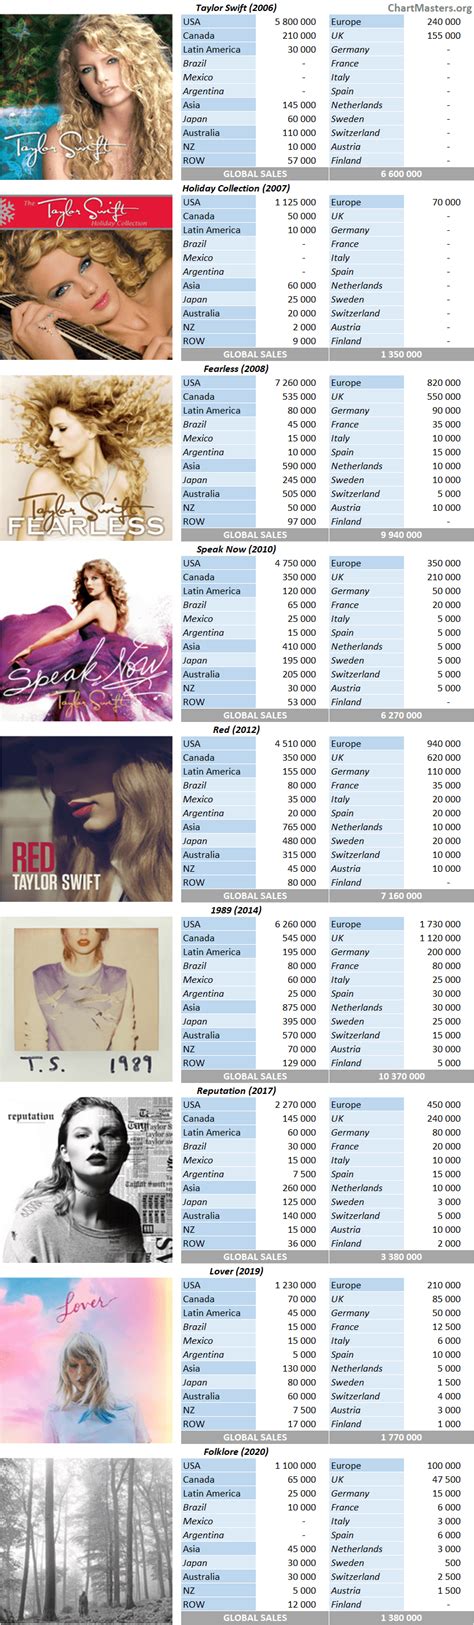 Taylor Discography Ranking Template